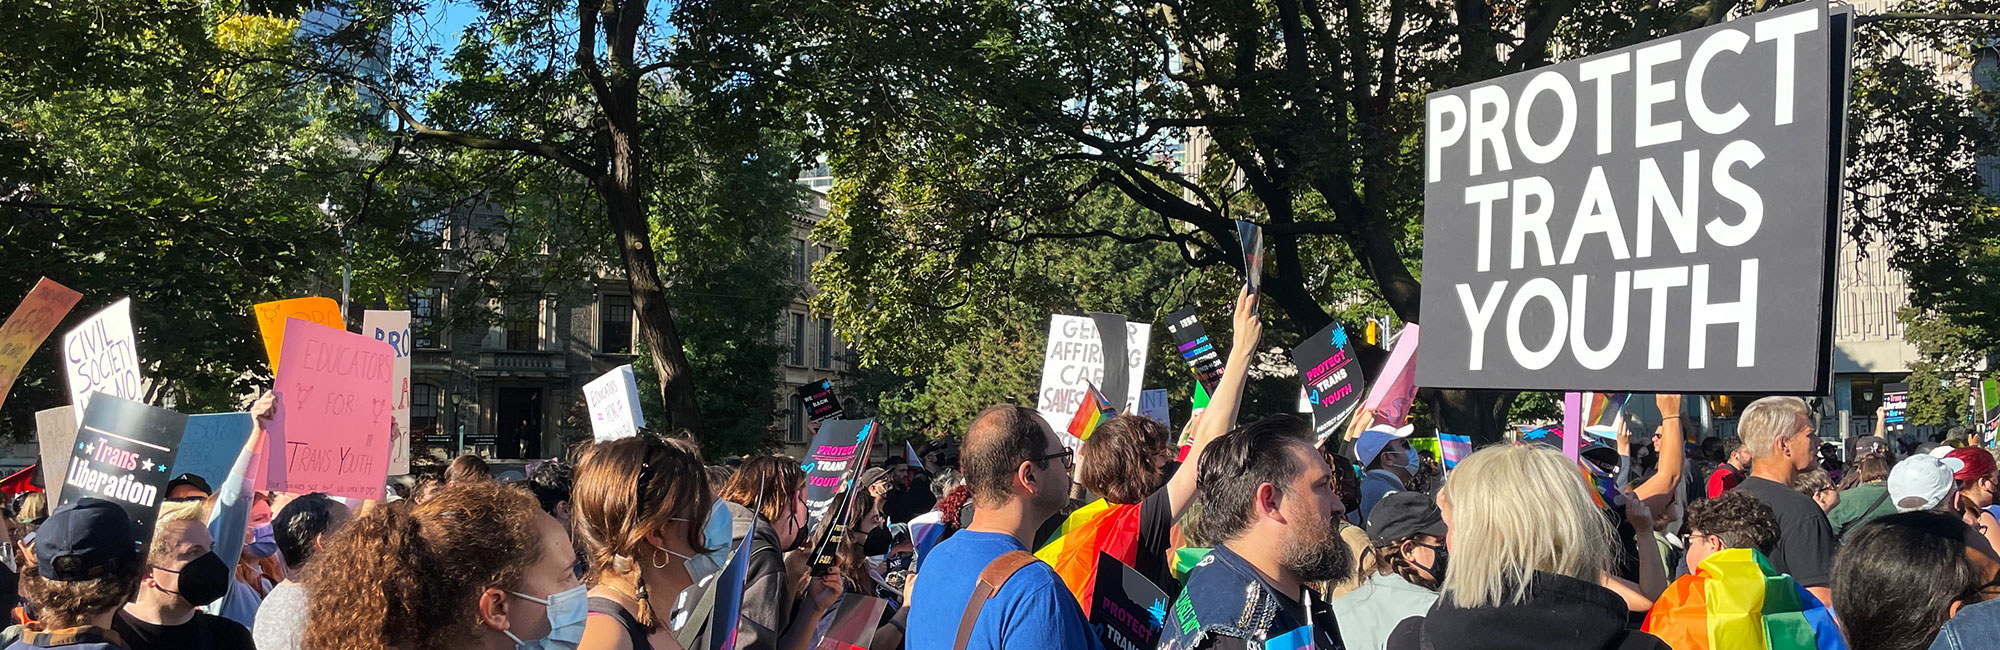 A group of people protesting for Trans youth rights